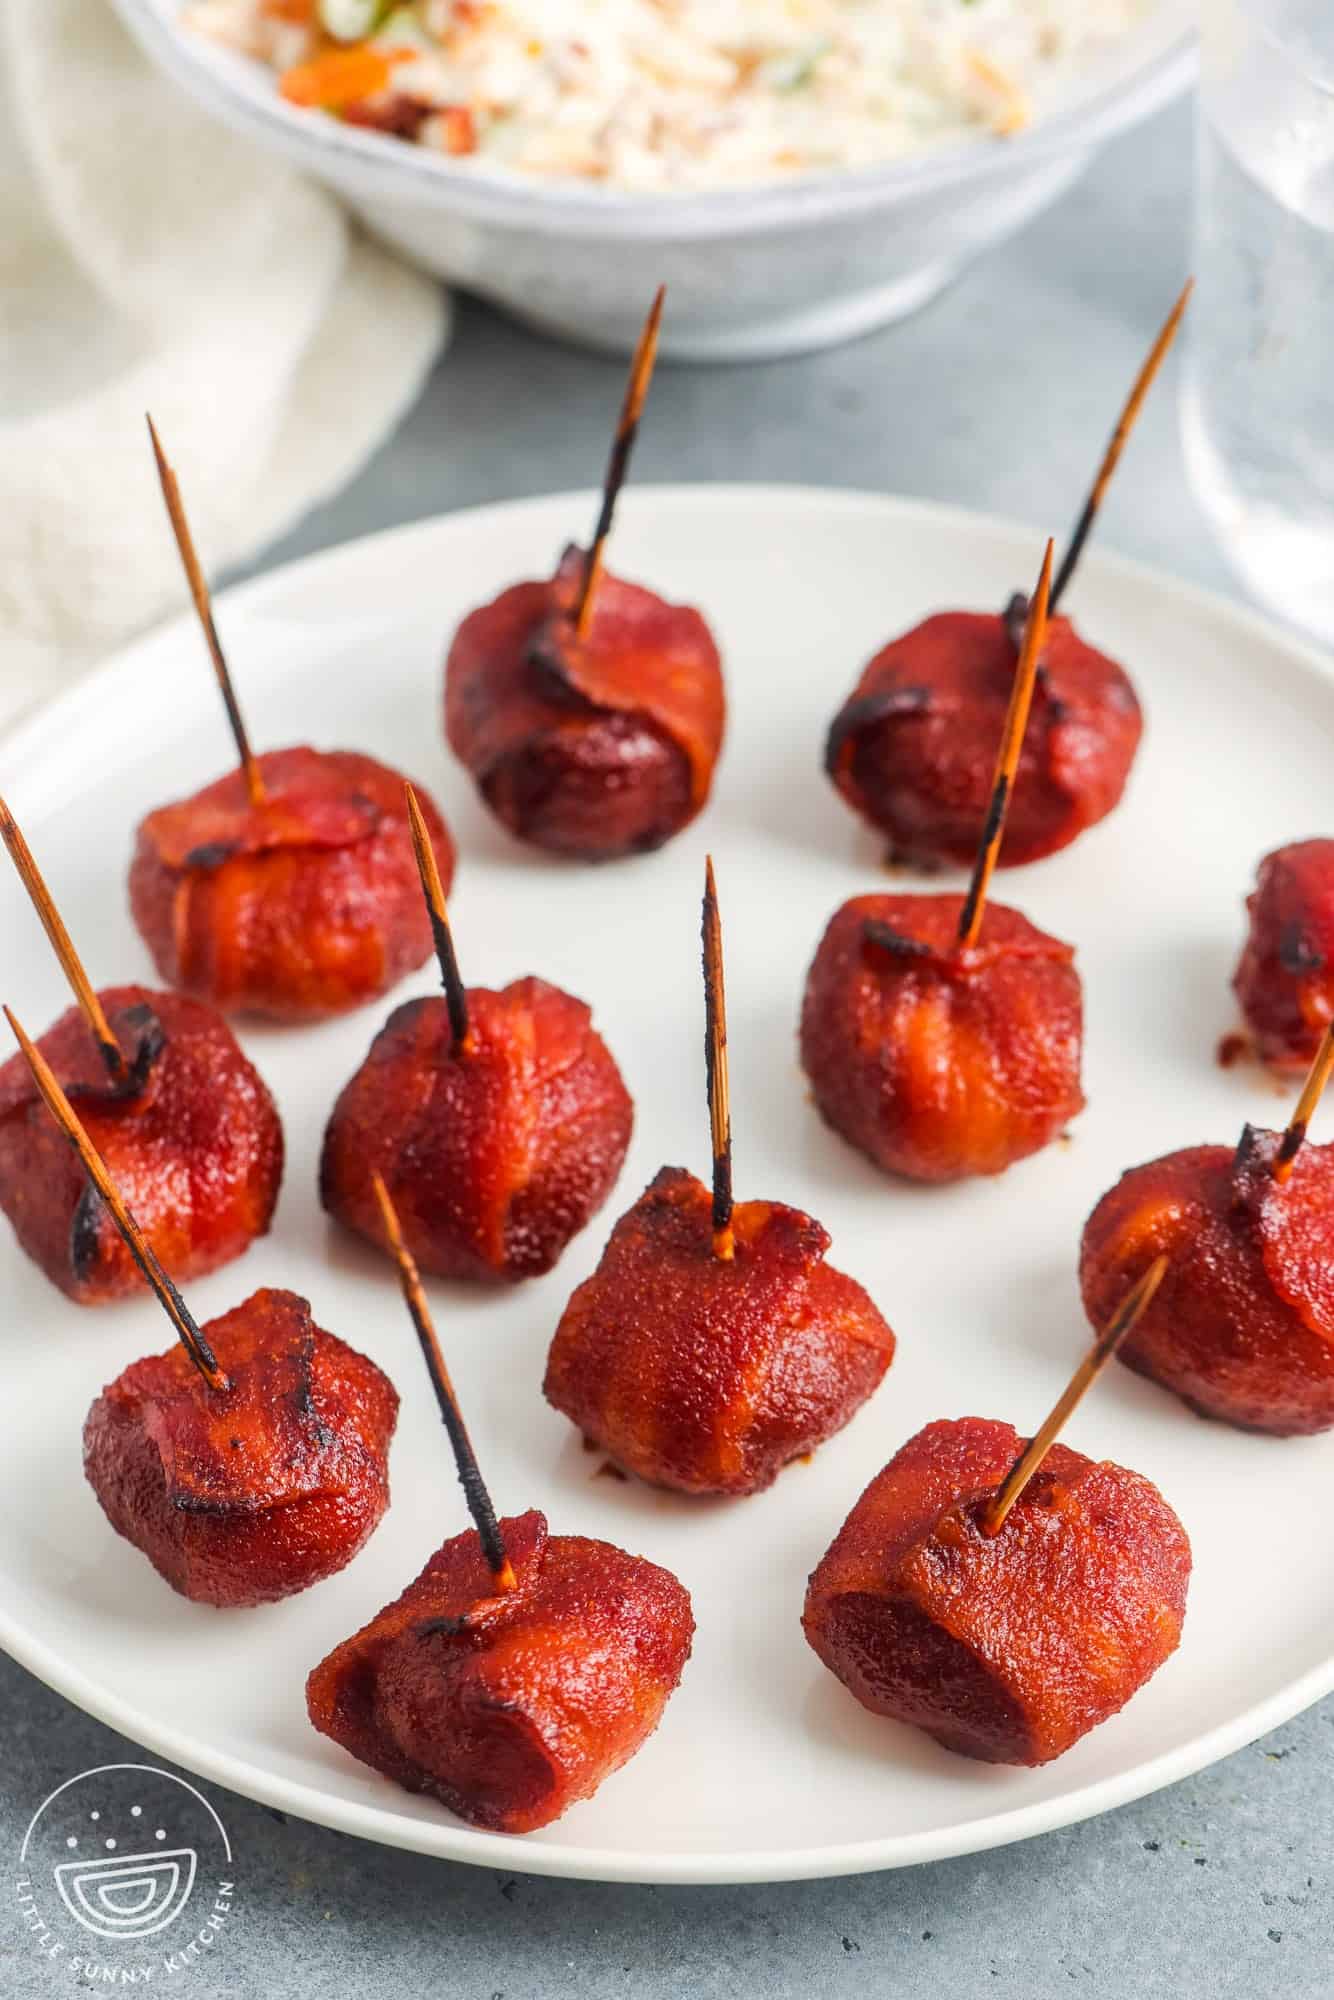 a white plate holding baked chestnuts marinated in red sauce and wrapped with bacon.